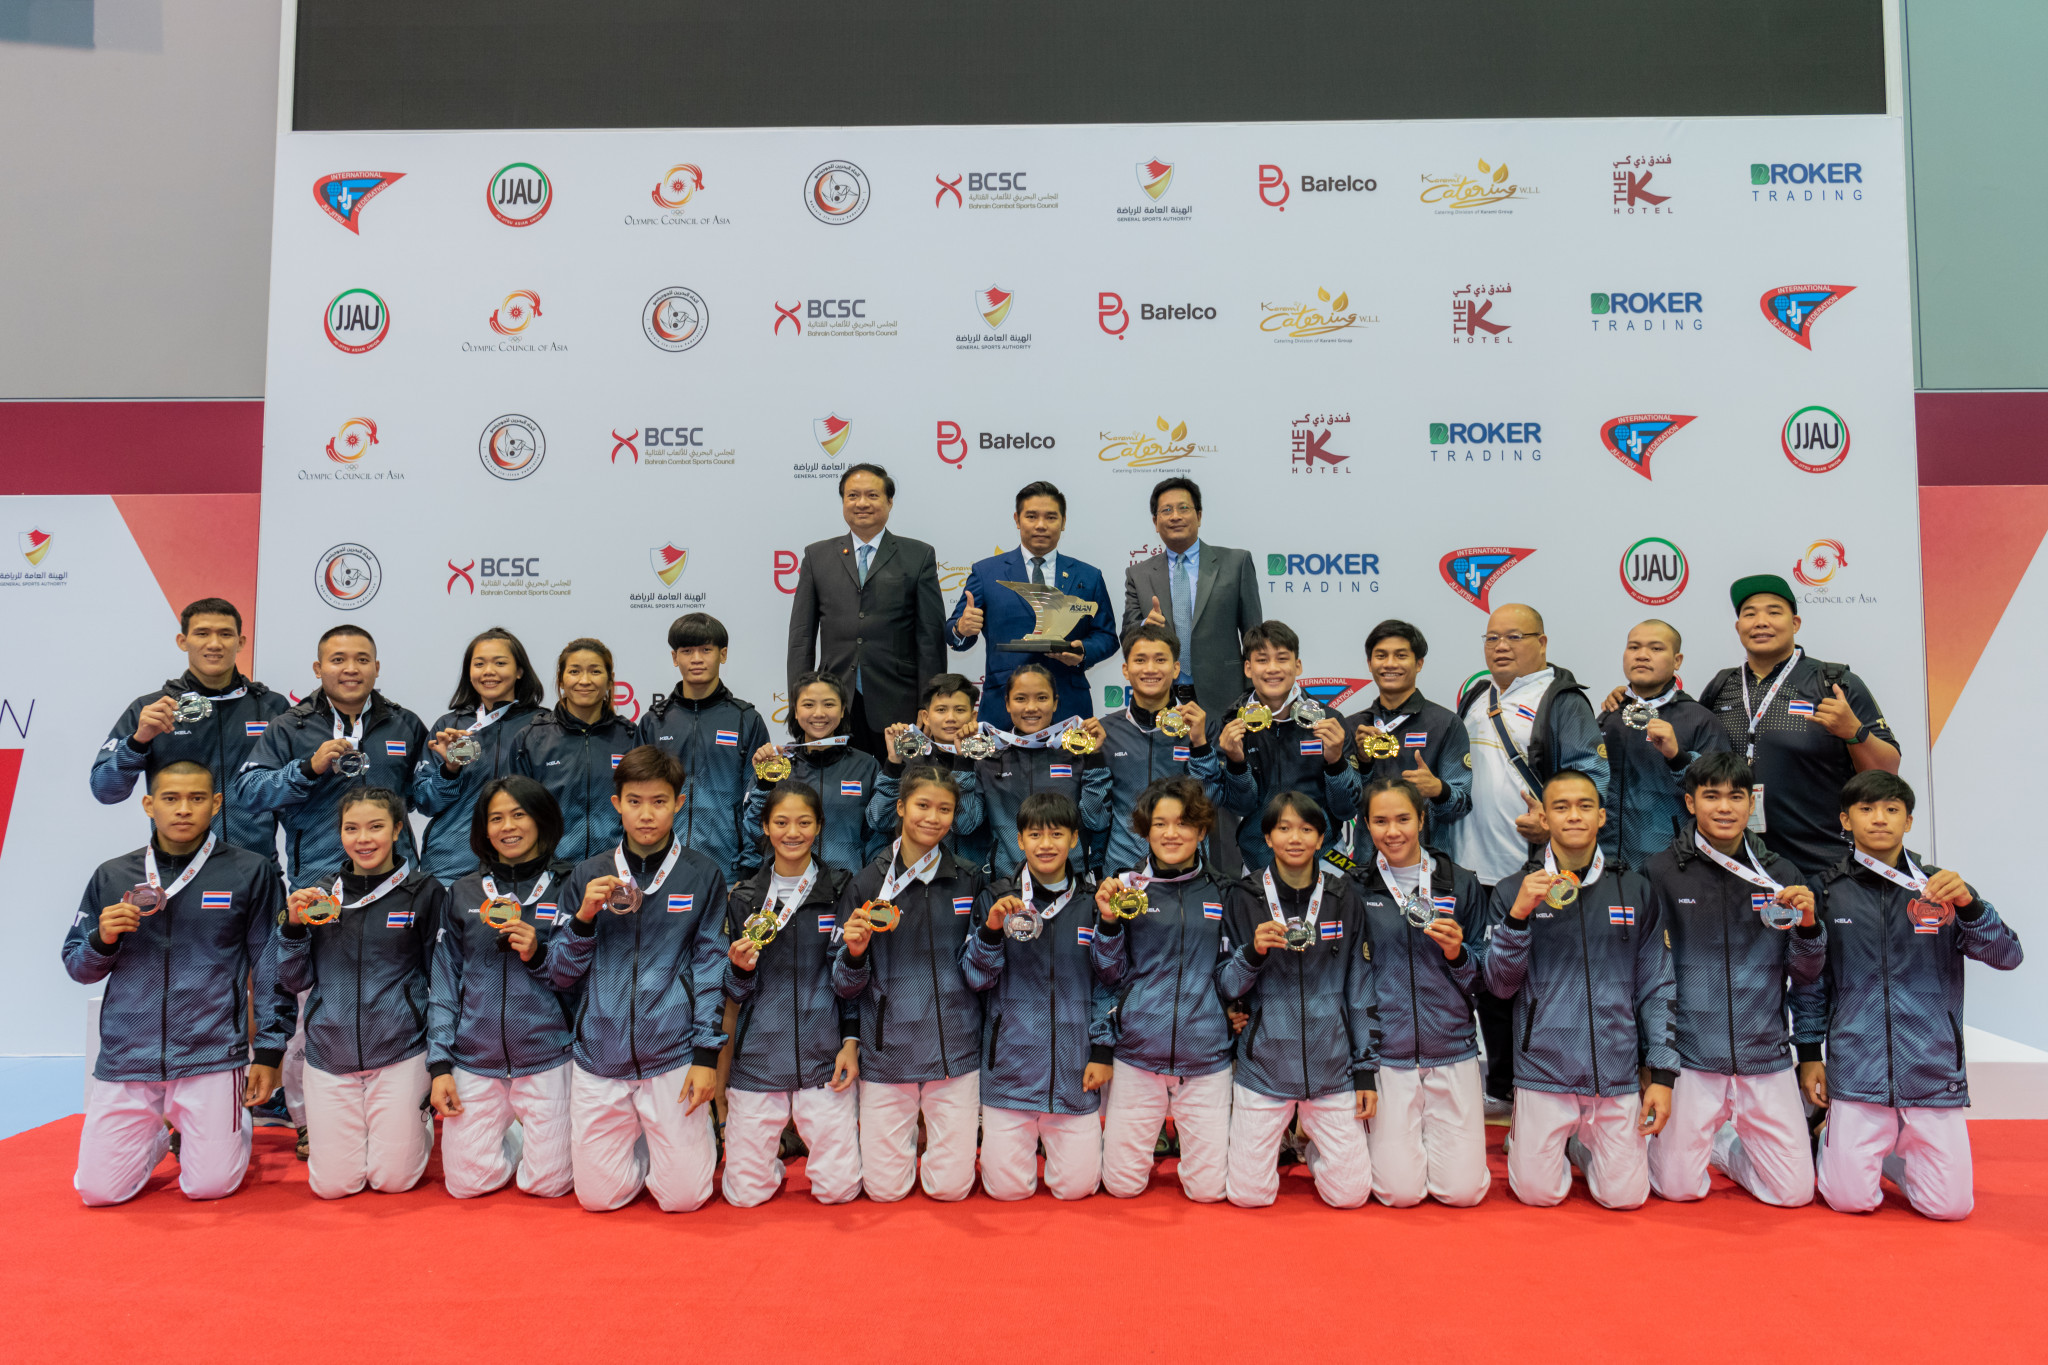 Thai athletes, coaches and officials celebrated a very successful day for the nation ©JJAU